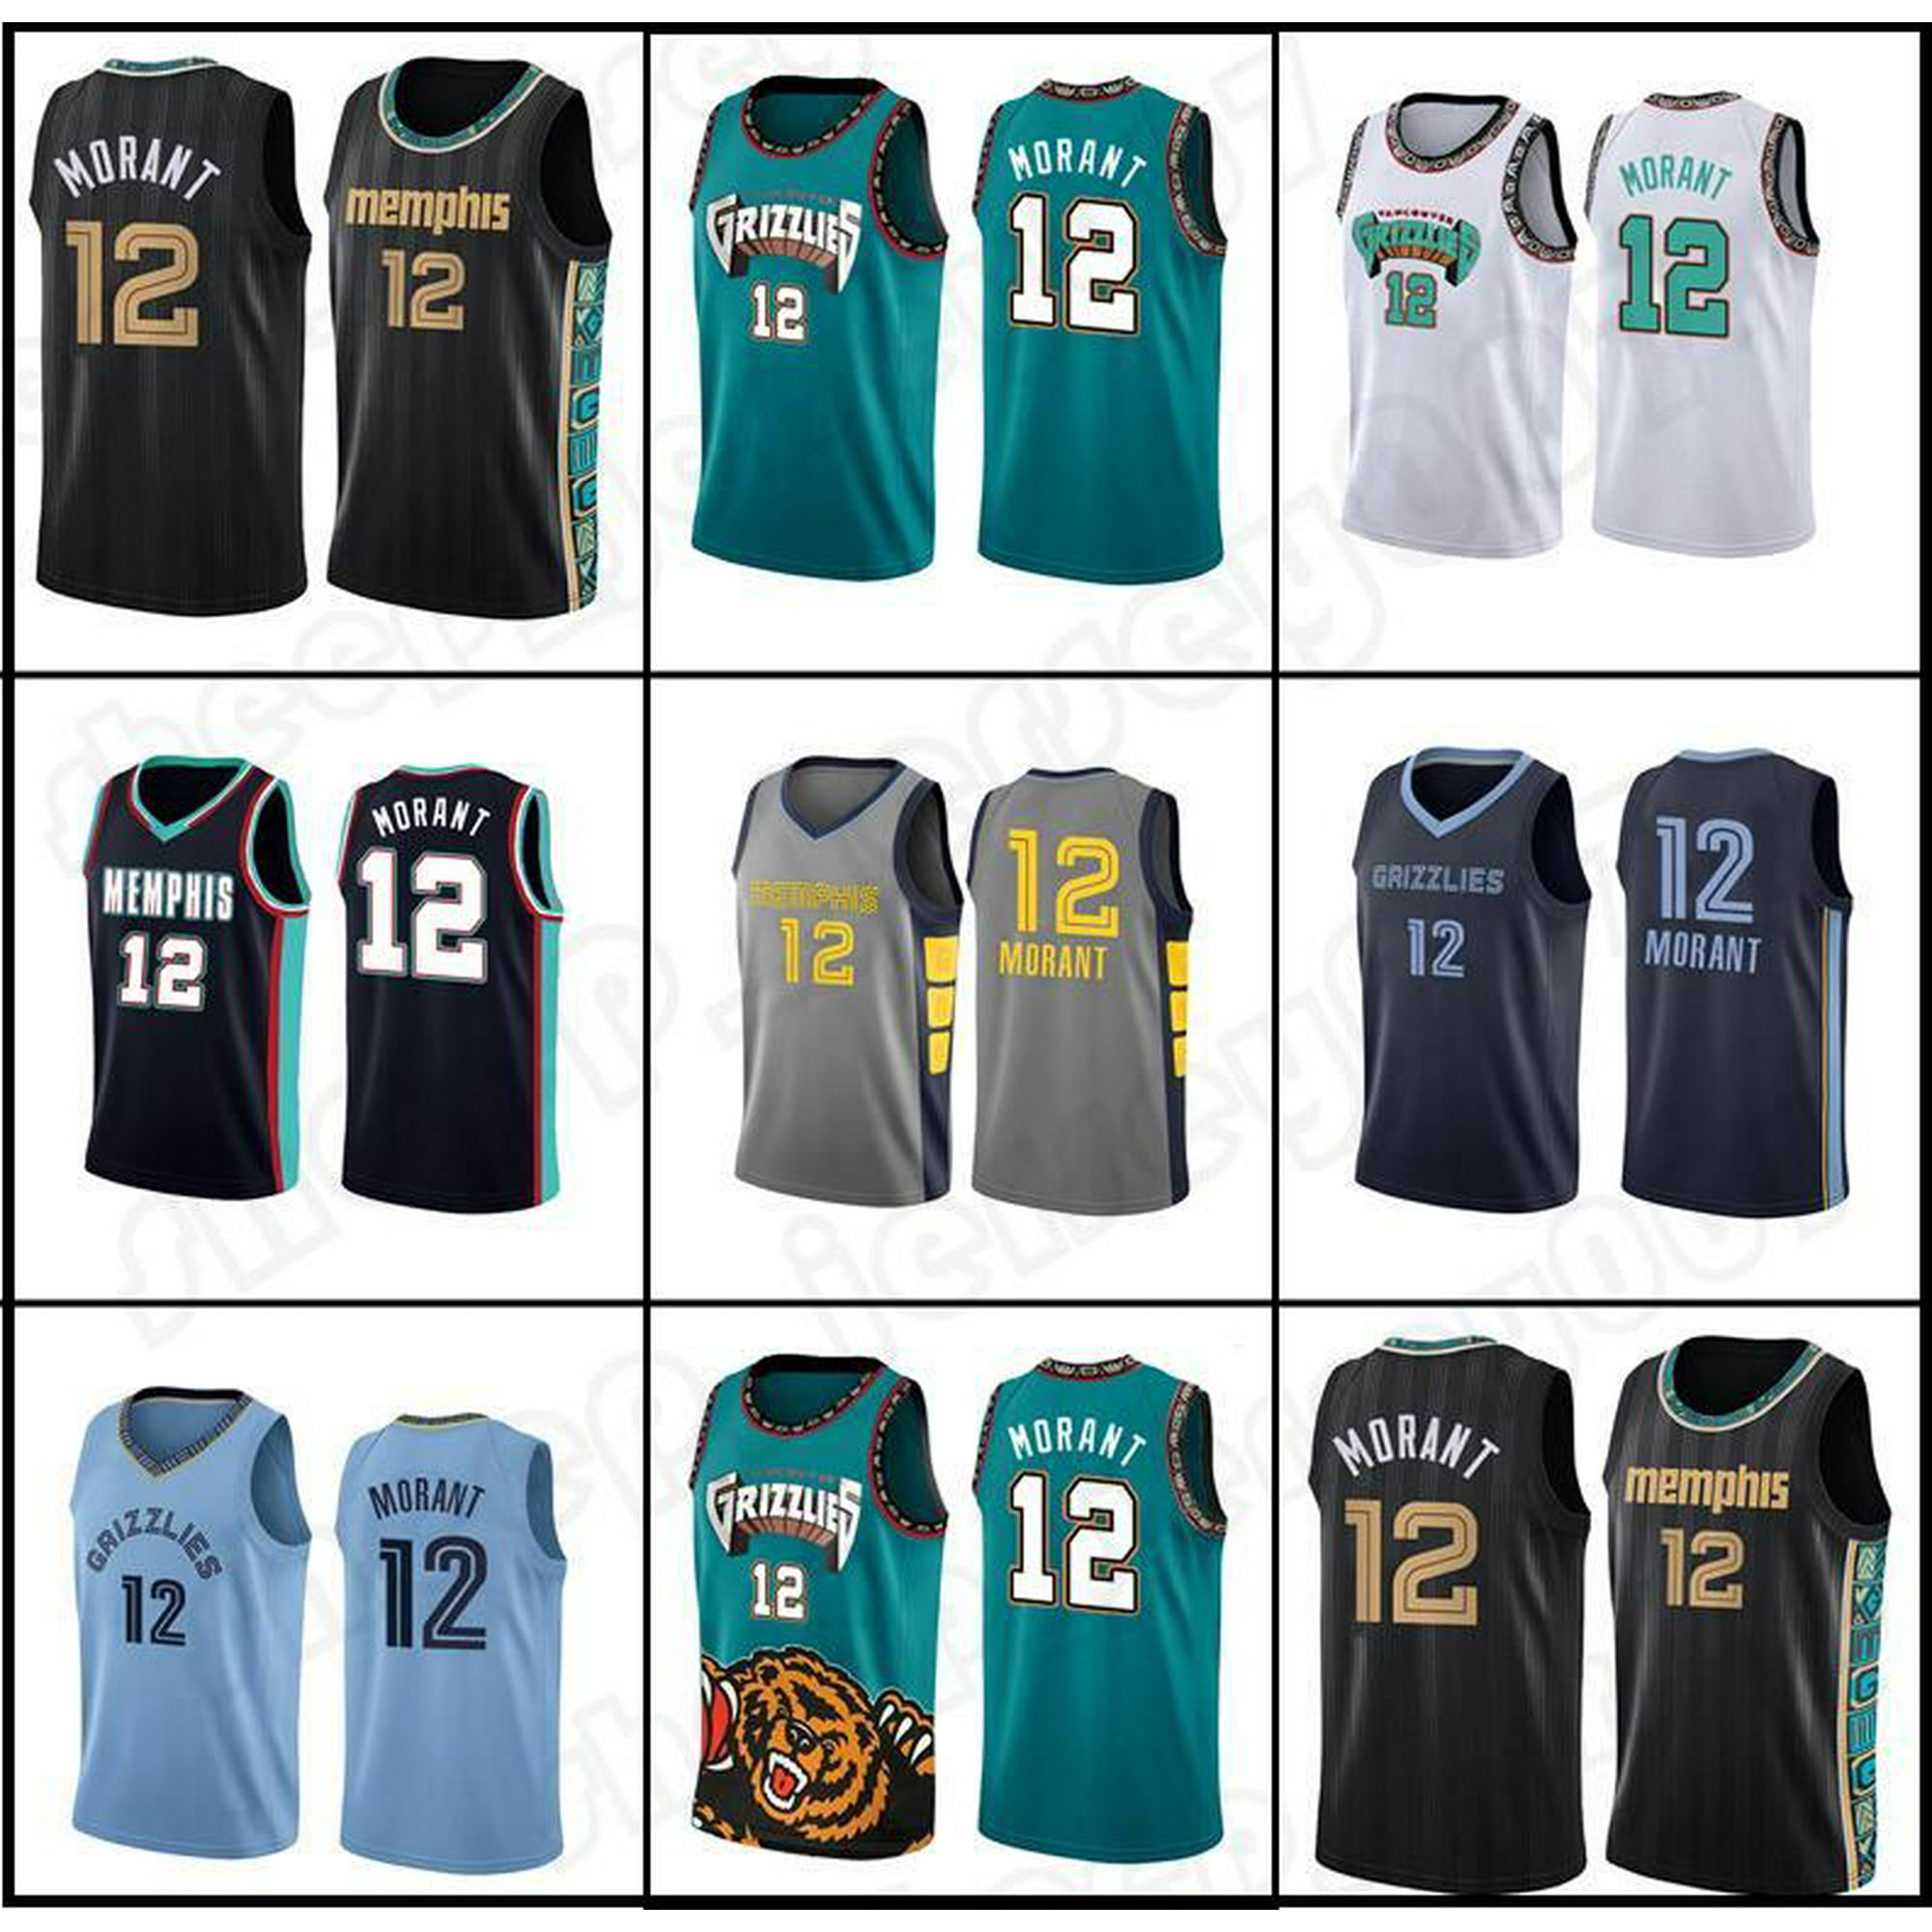 Shop New Arrival Basketball Jersey Sando Grizzlies with great